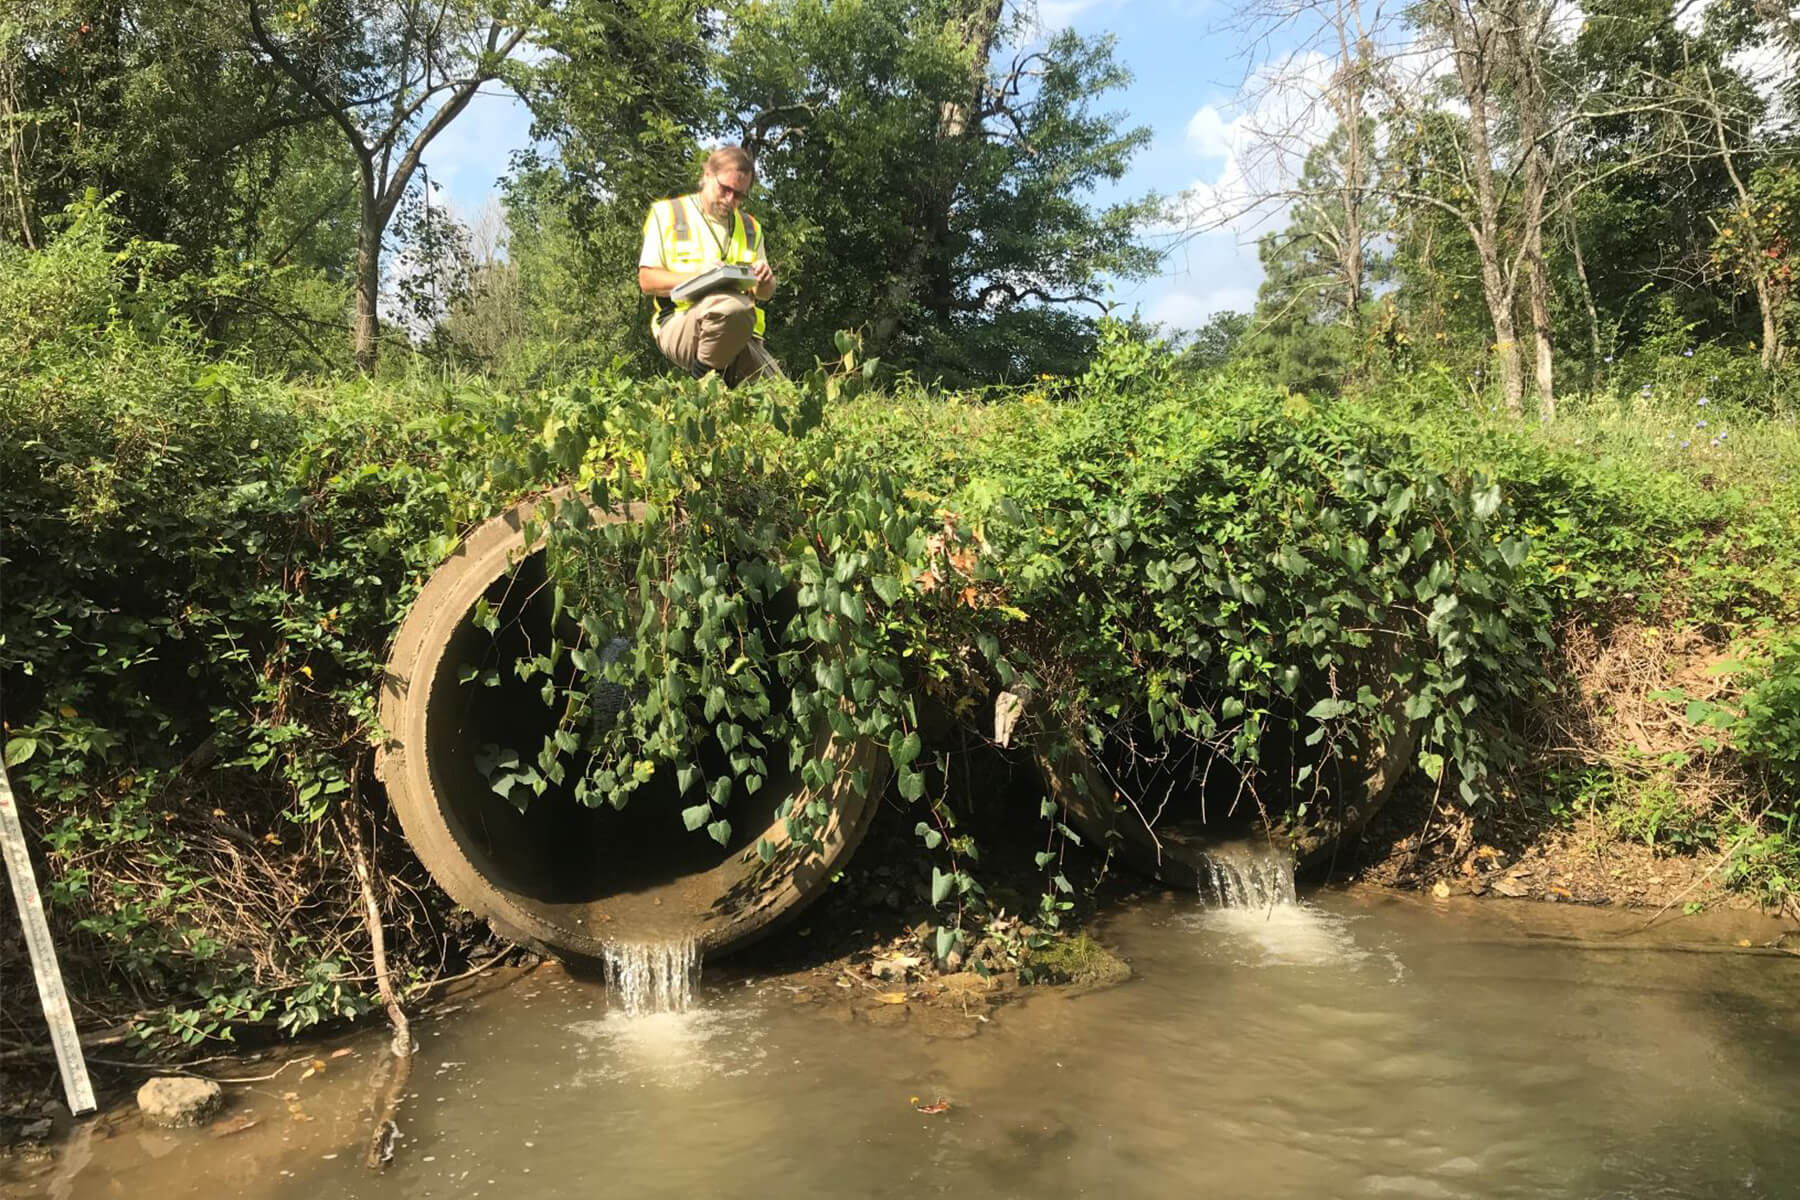 A double-sided culvert causes fish blockage.